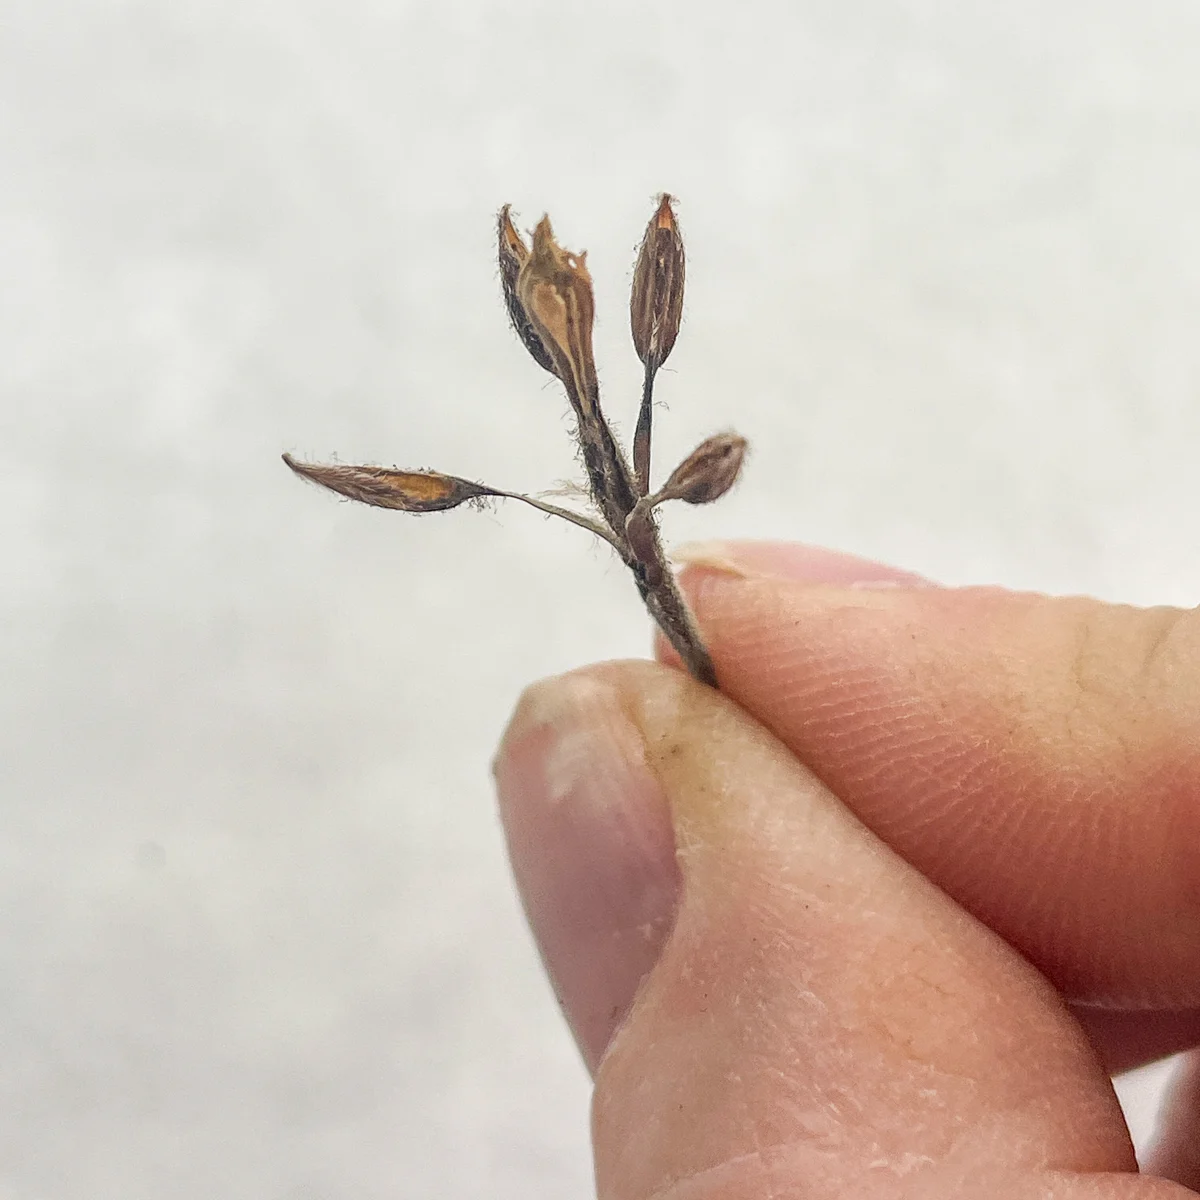 geranium seeds pulled from pod